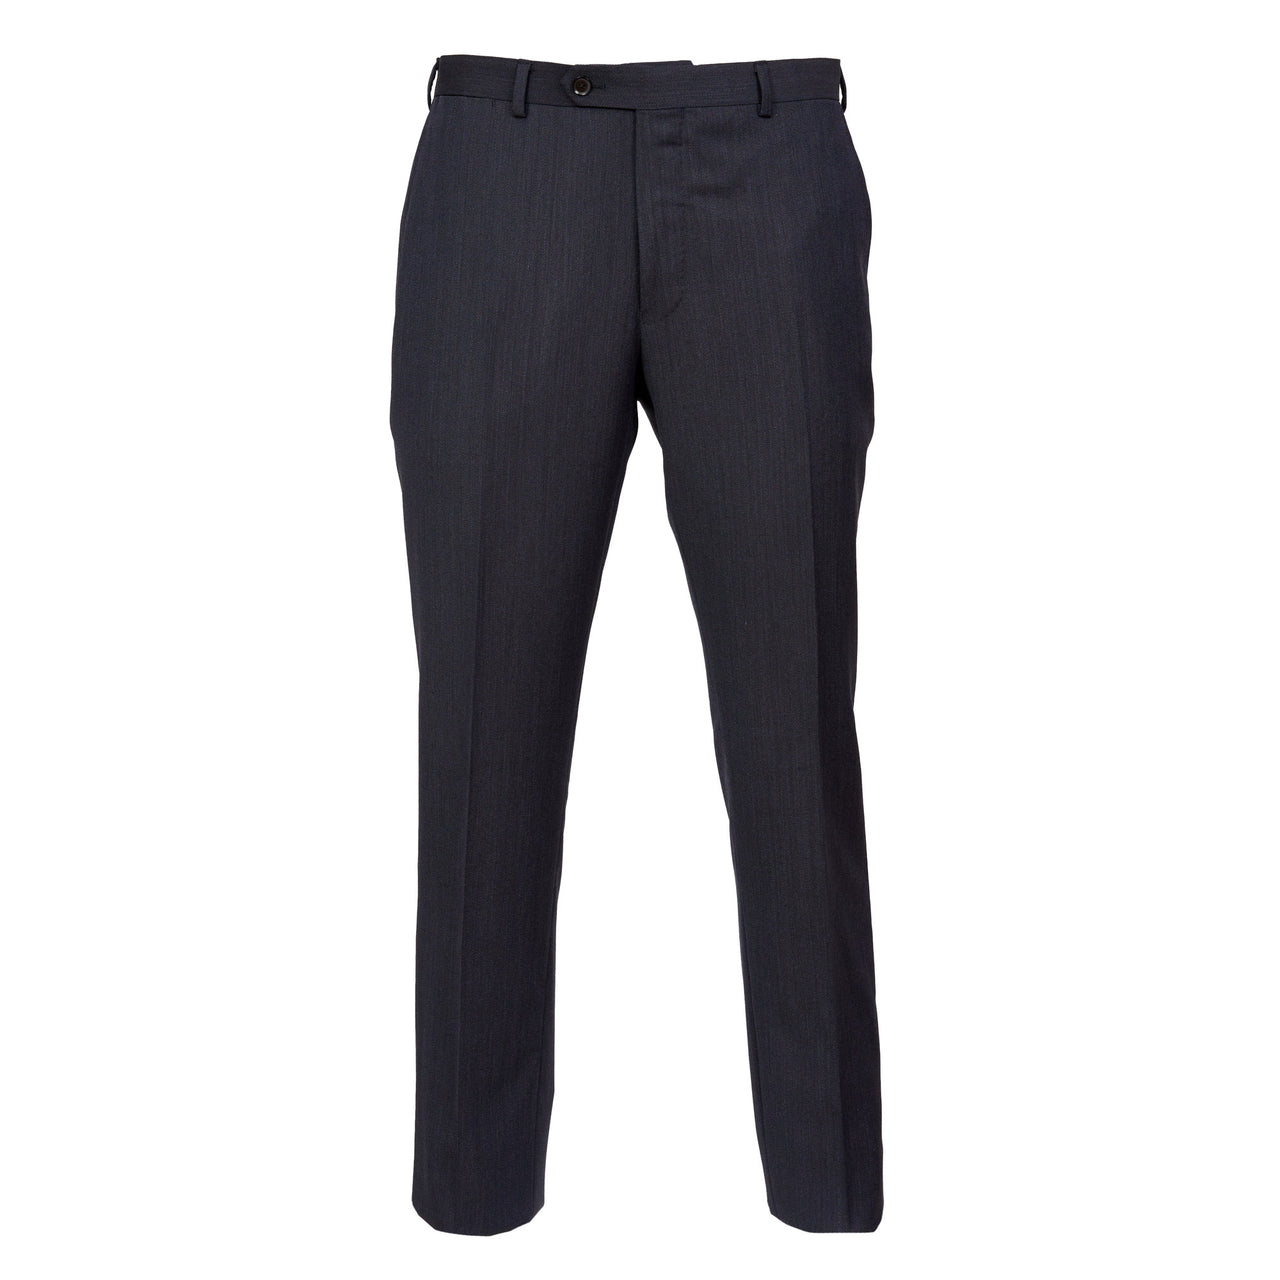 HENRY SARTORIAL Flat Front Twill Wool Trousers BLUE REG